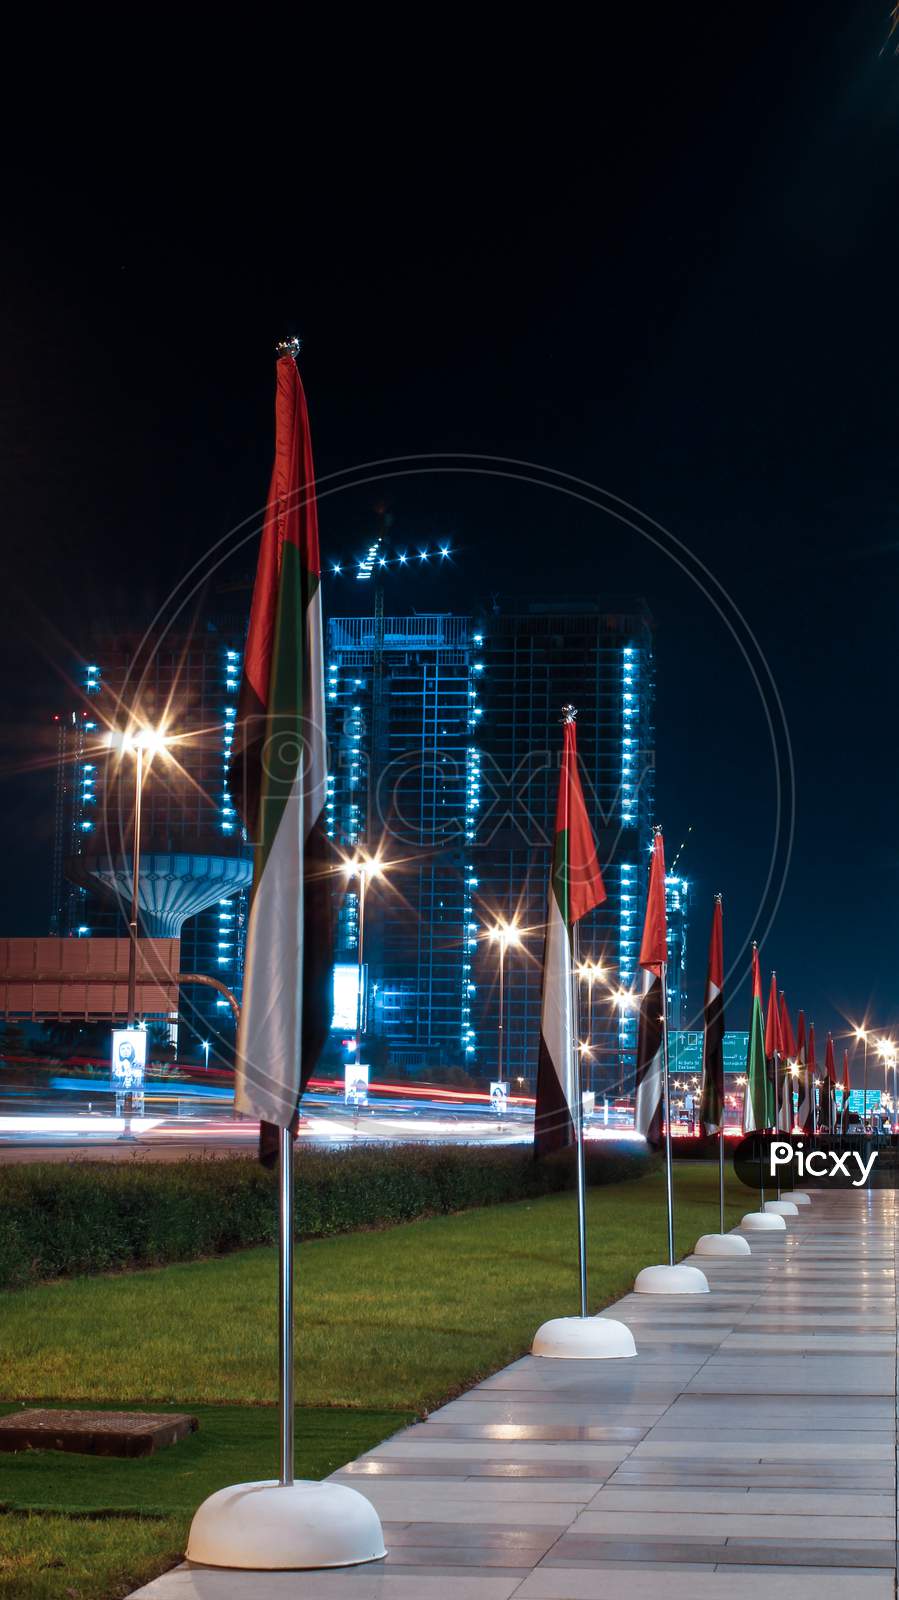 A Long Exposure Photo Of UAE Flags Alongside A Road And Garden In Downtown Dubai, United Arab Emirates.